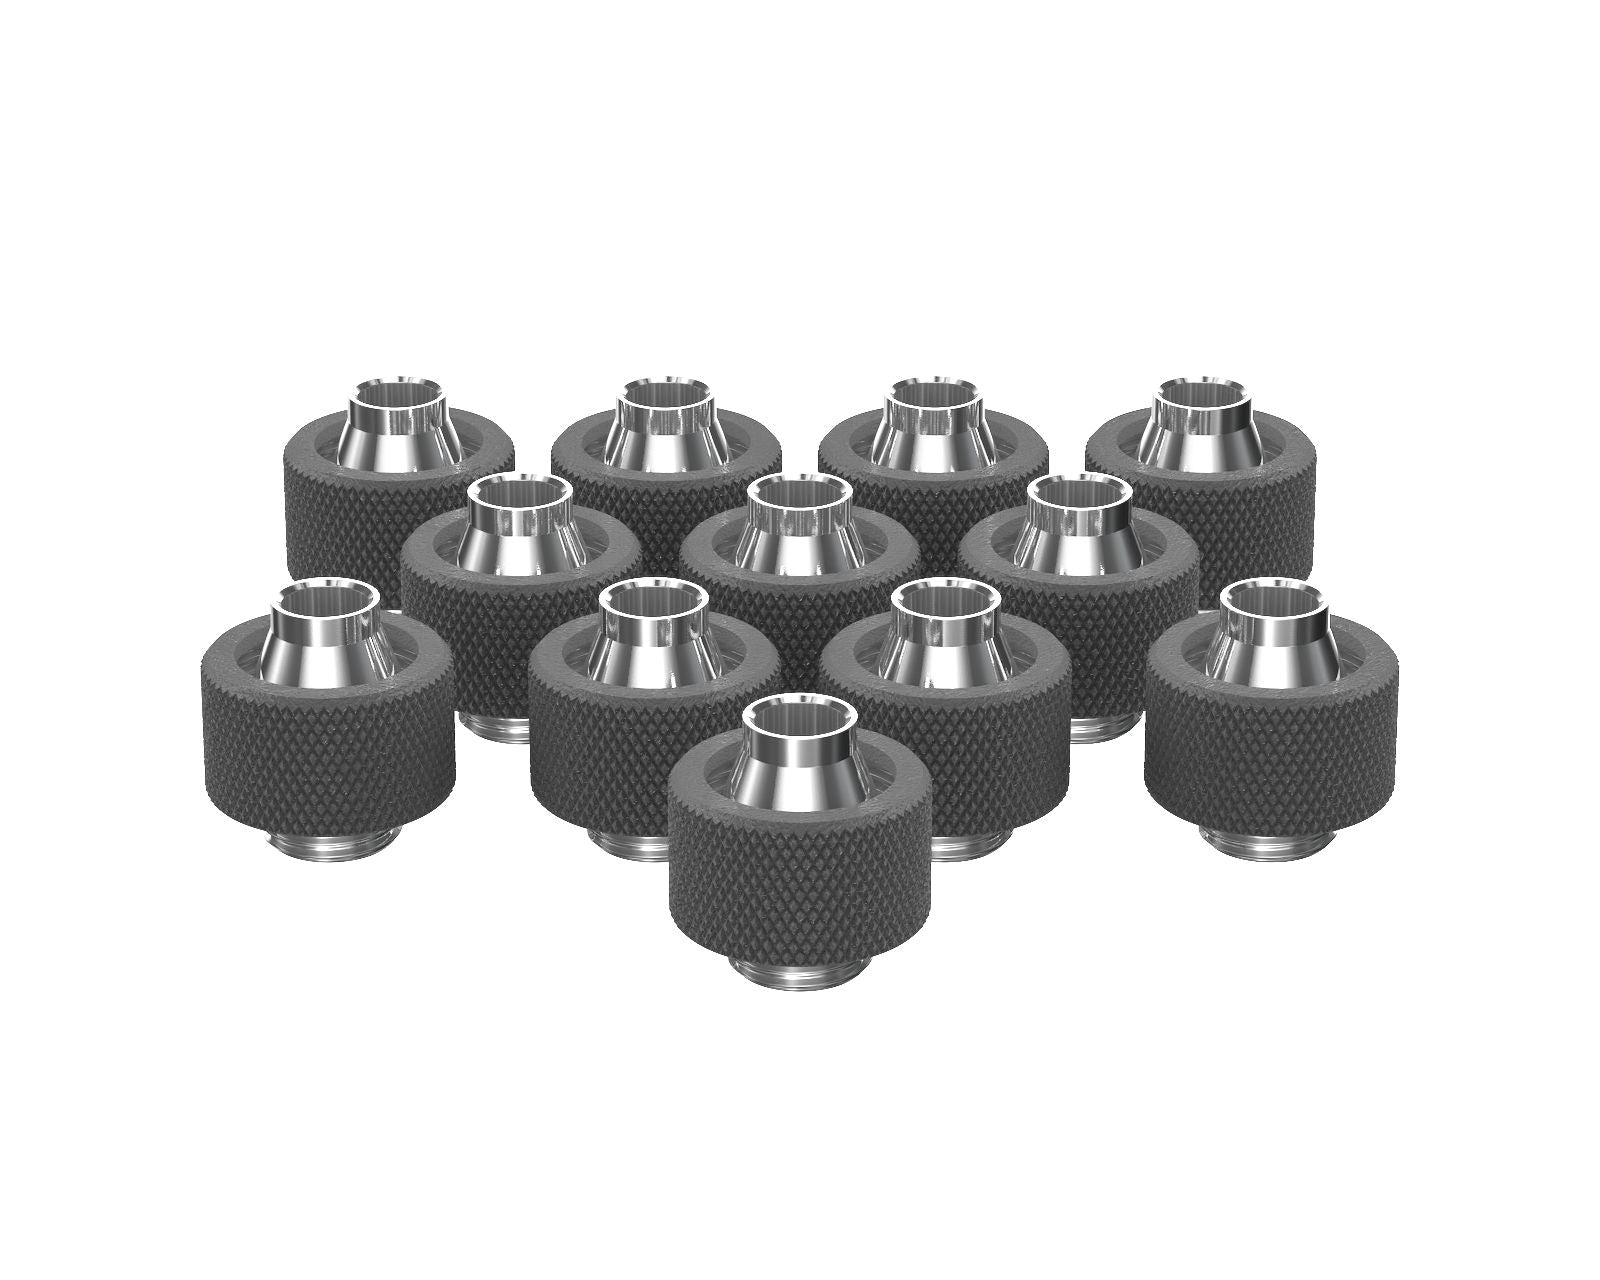 PrimoChill SecureFit SX - Premium Compression Fitting For 7/16in ID x 5/8in OD Flexible Tubing 12 Pack (F-SFSX758-12) - Available in 20+ Colors, Custom Watercooling Loop Ready - TX Matte Gun Metal